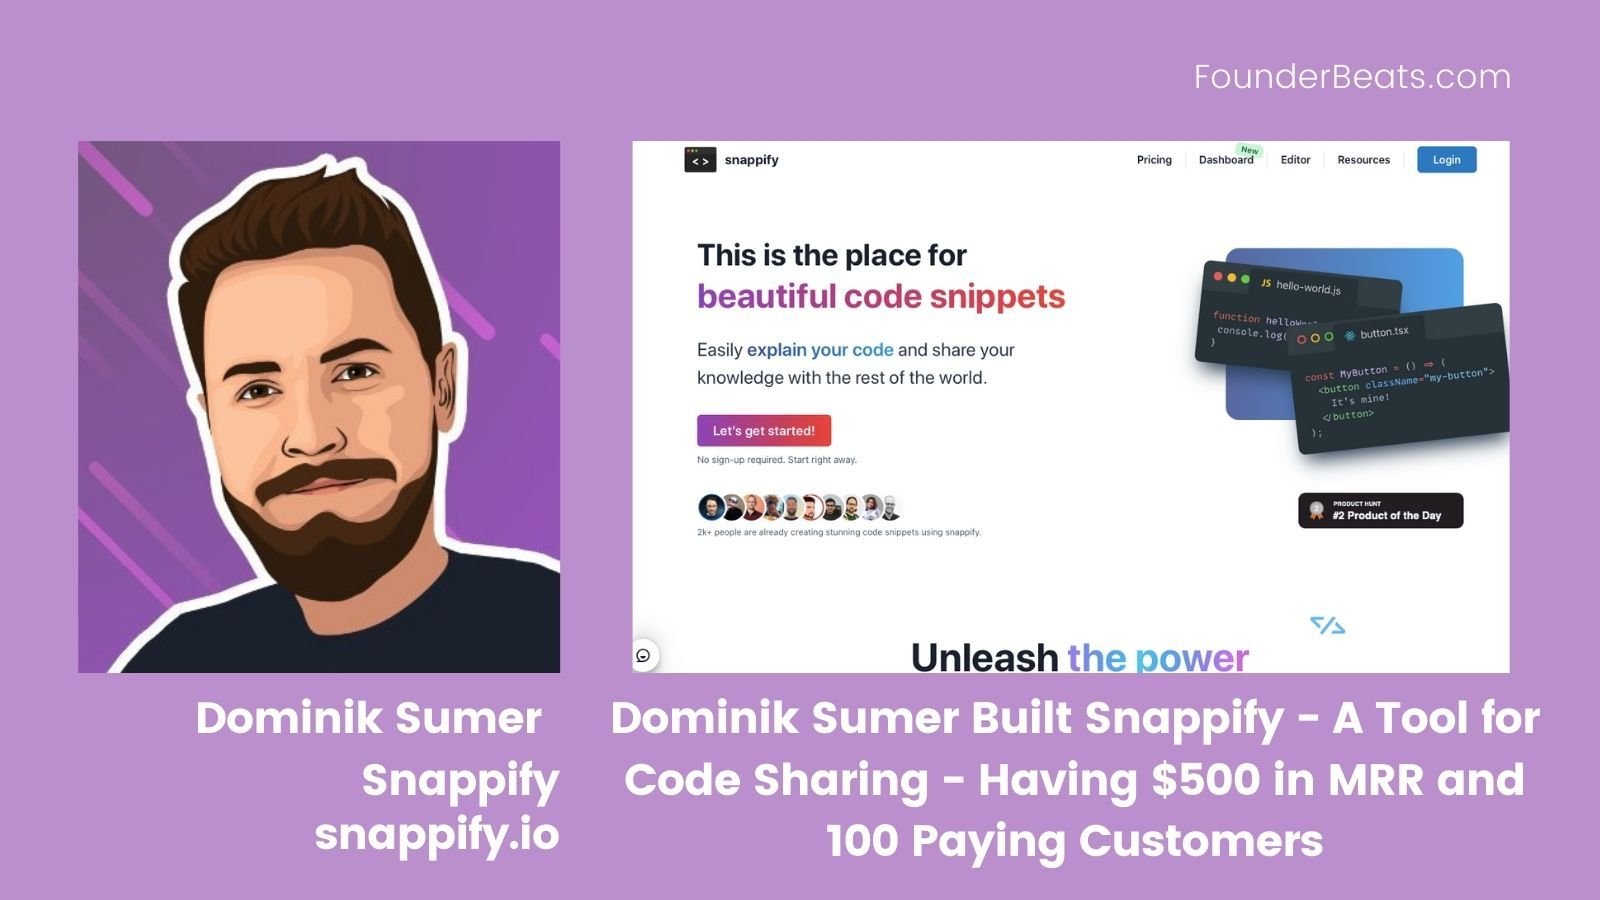 Dominik Sumer Built Snappify - A Tool for Code Sharing - Having $500 in MRR and 100 Paying Customers